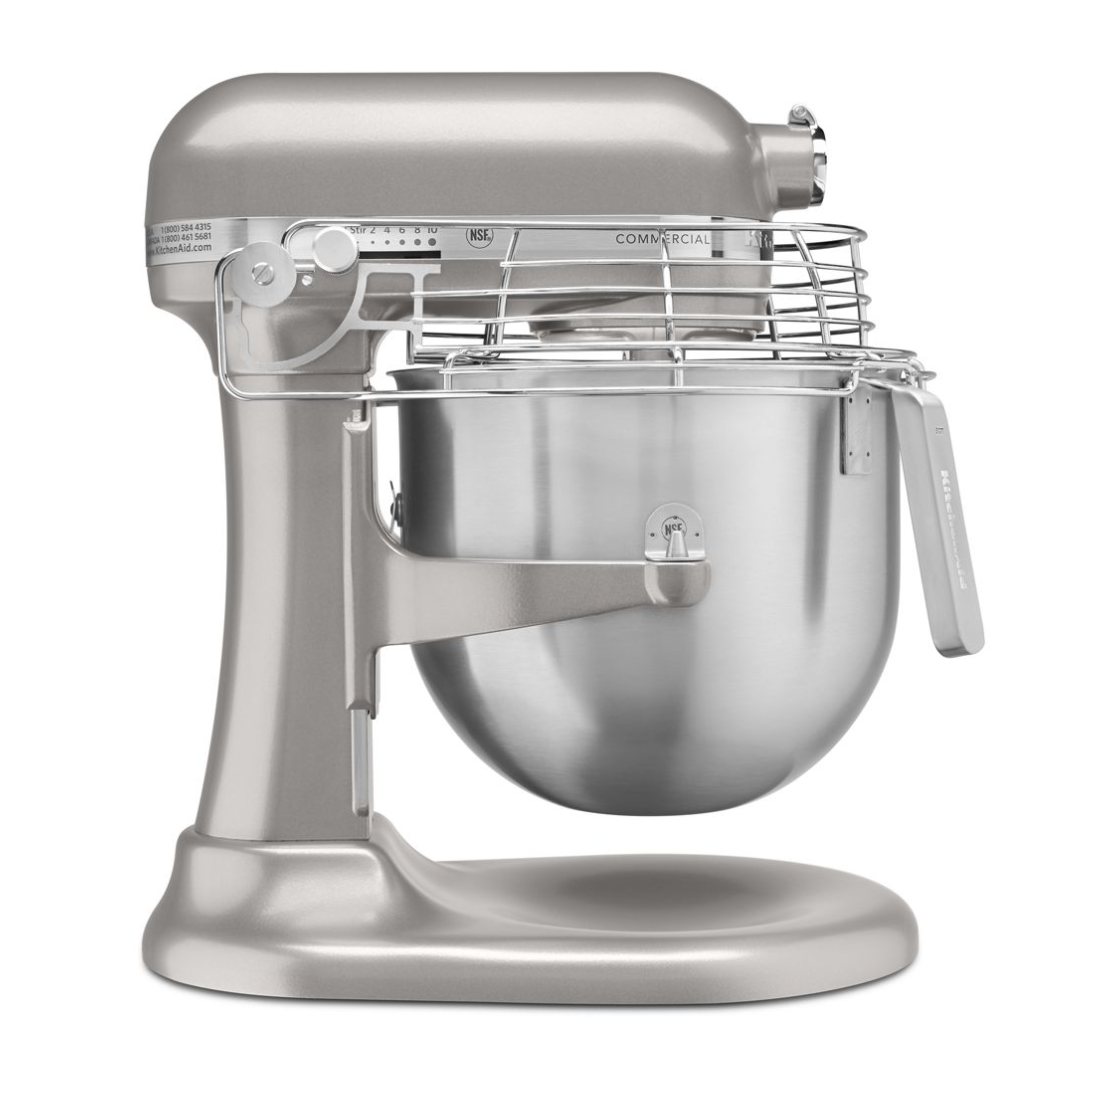 KitchenAid Commercial Series 8 Quart BowlLift Stand Mixer with Stainless Steel Bowl Guard